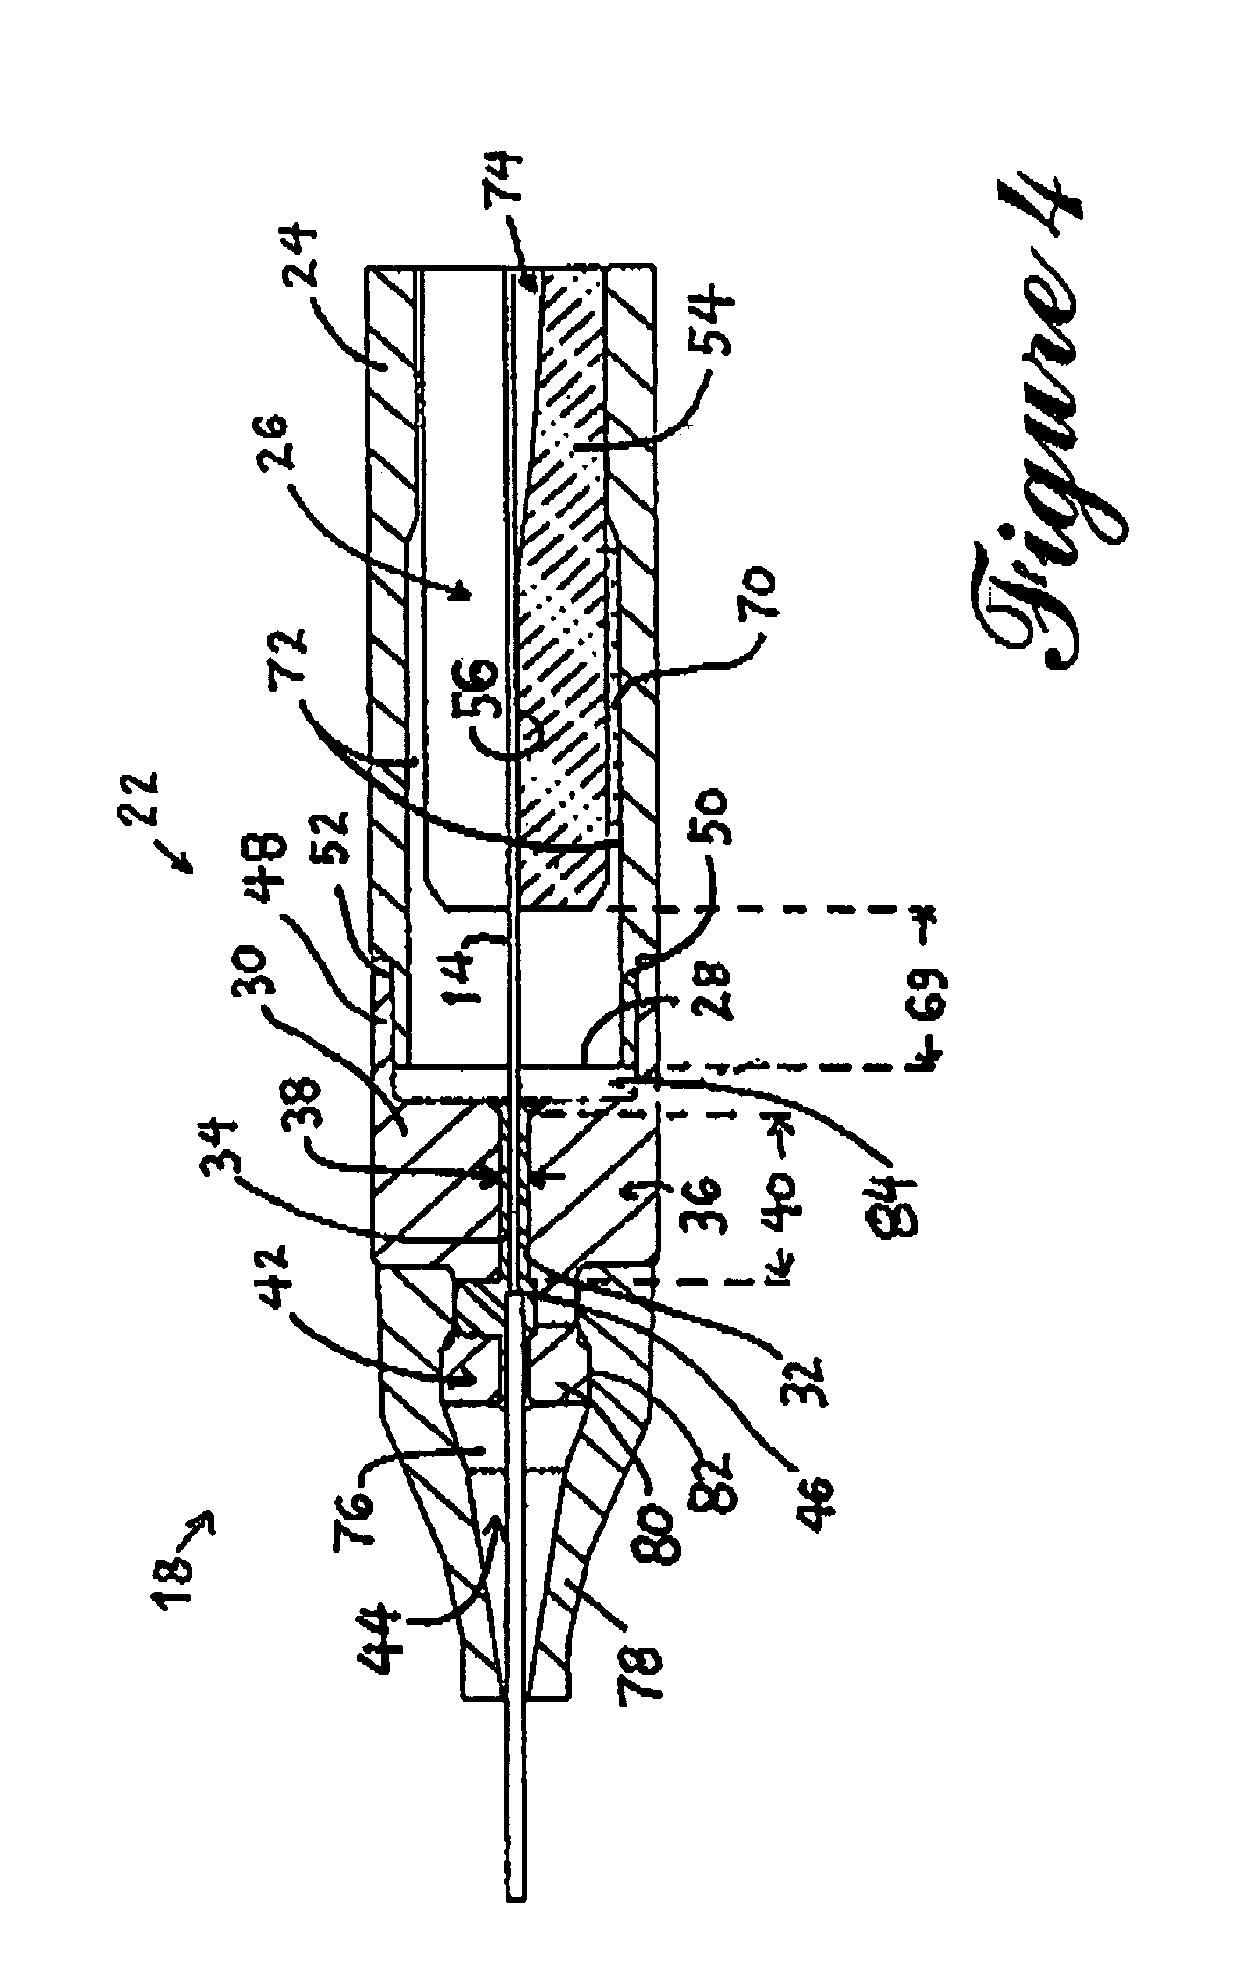 Optical component packaging device